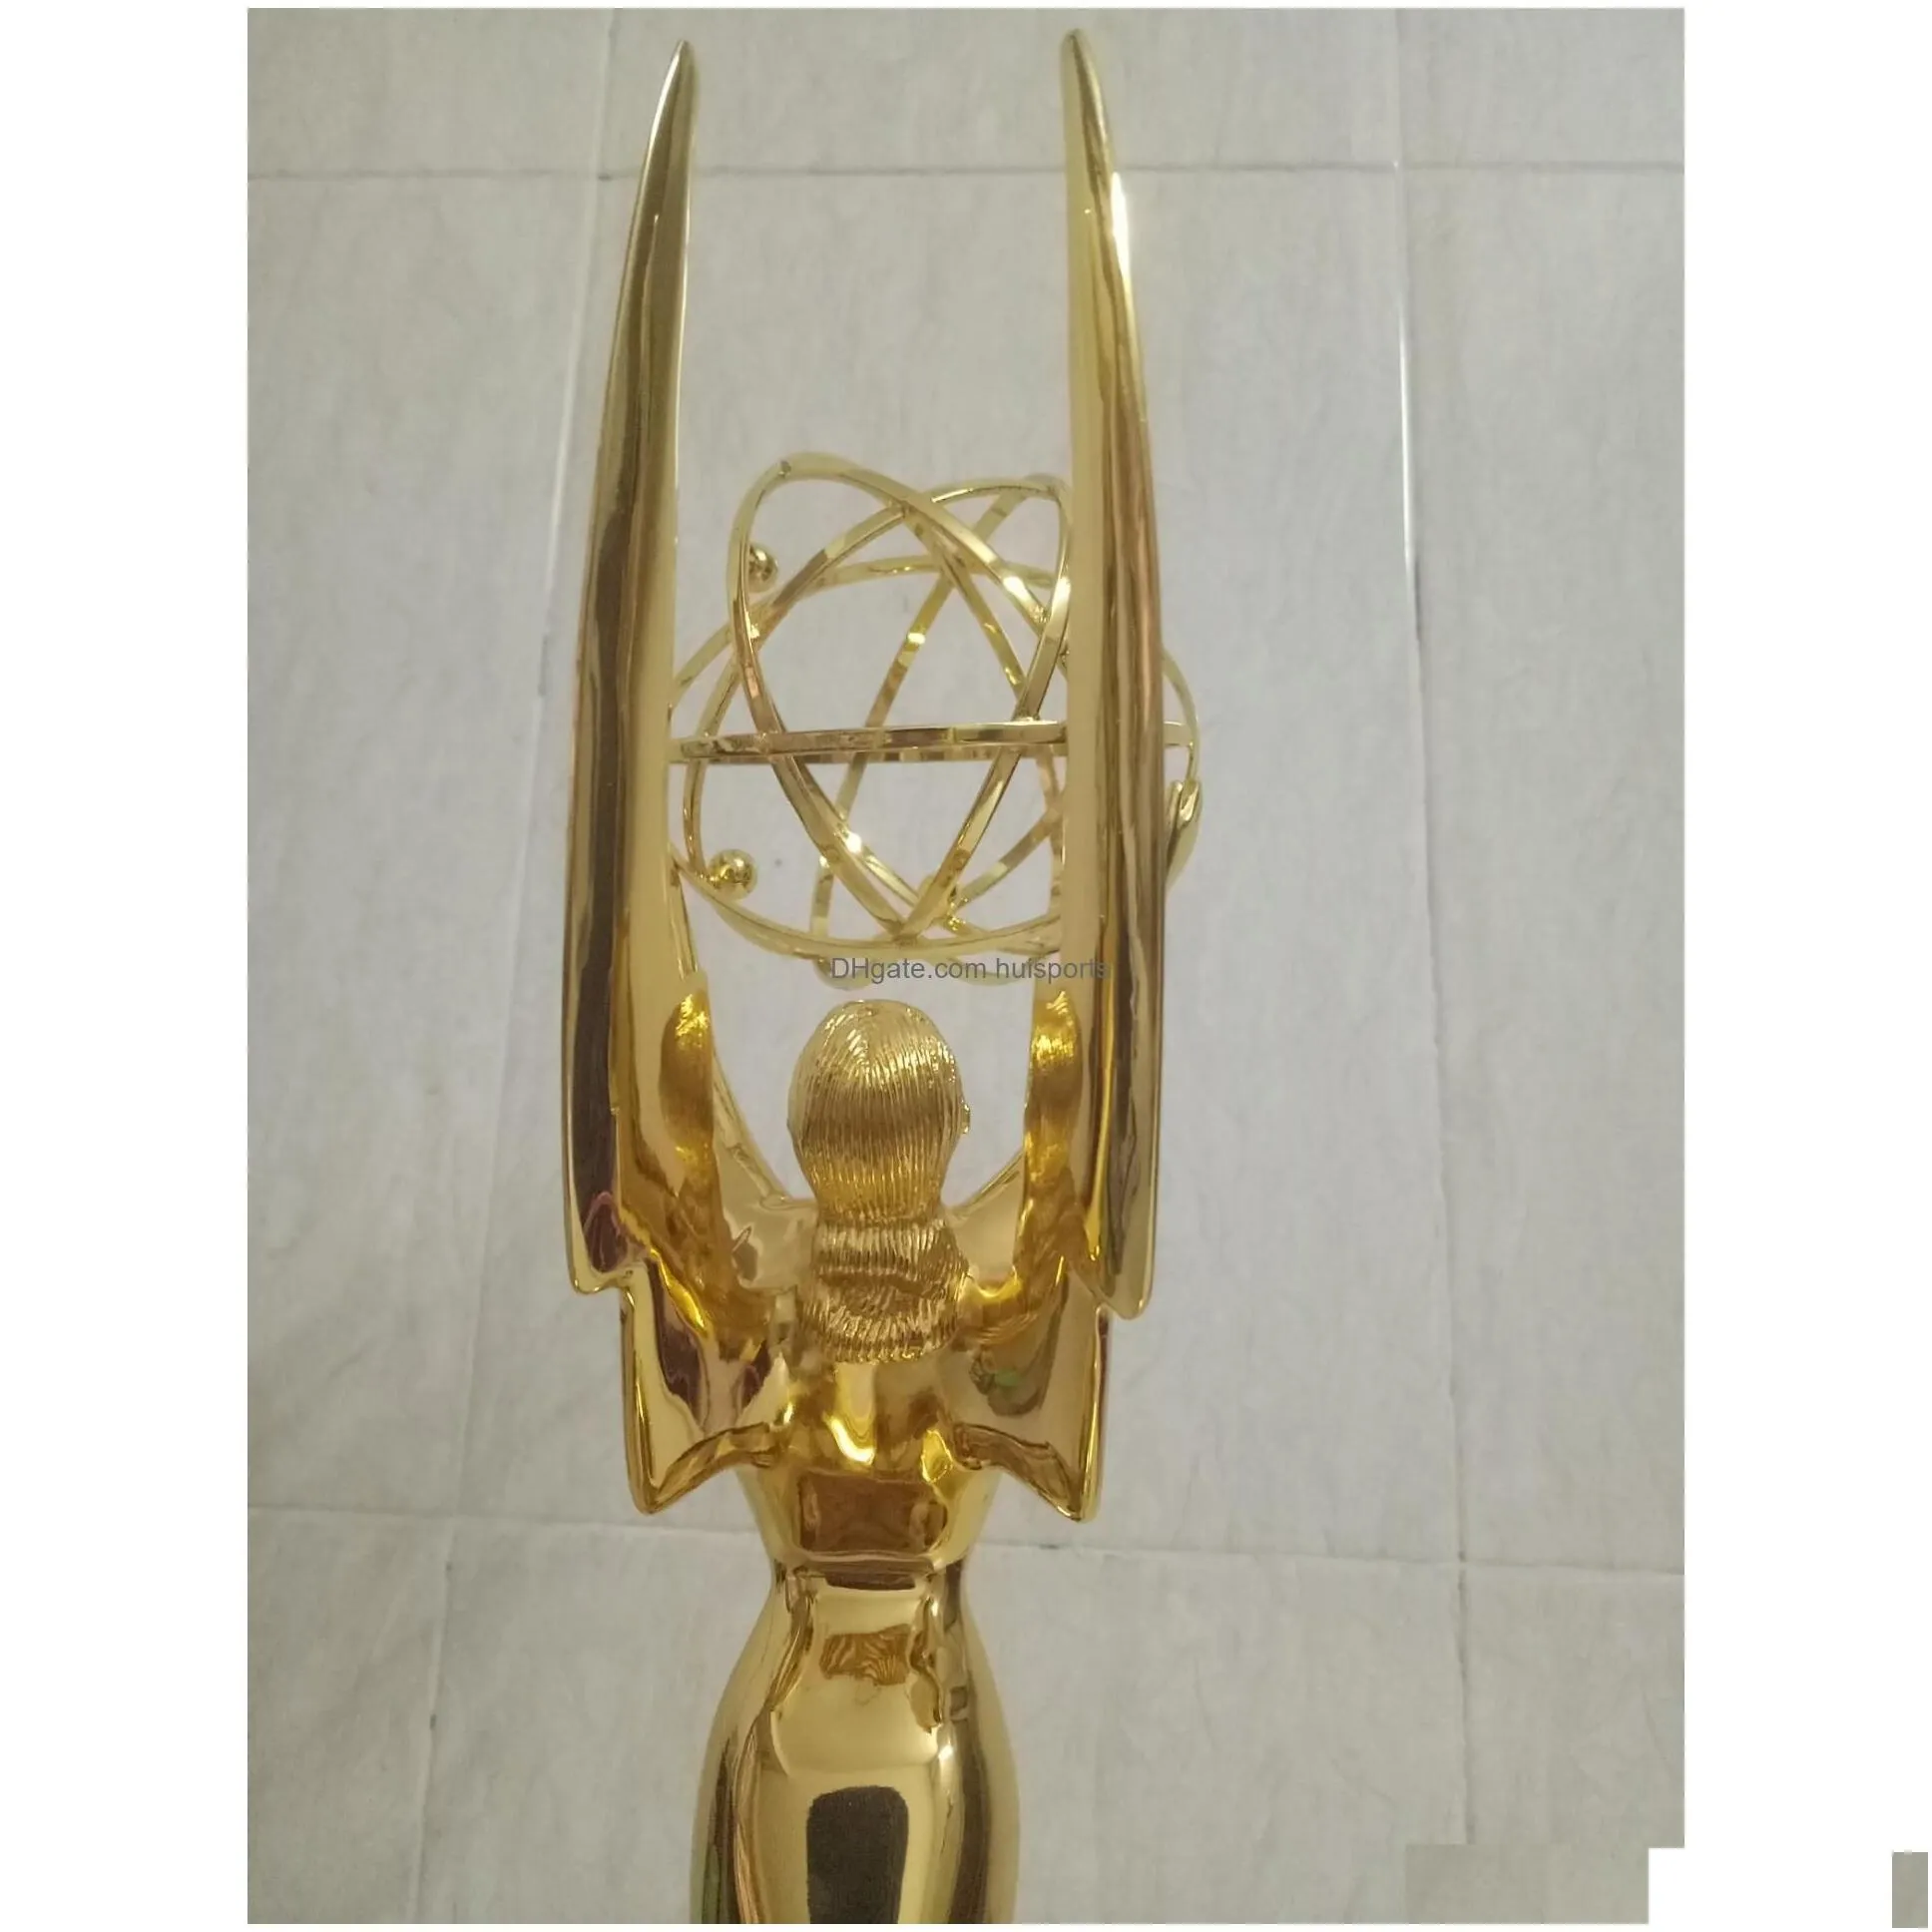 collectable style 28 cm national emmy awards metal trophy replica zinc alloy award drop delivery sports outdoors athletic outdoor acc